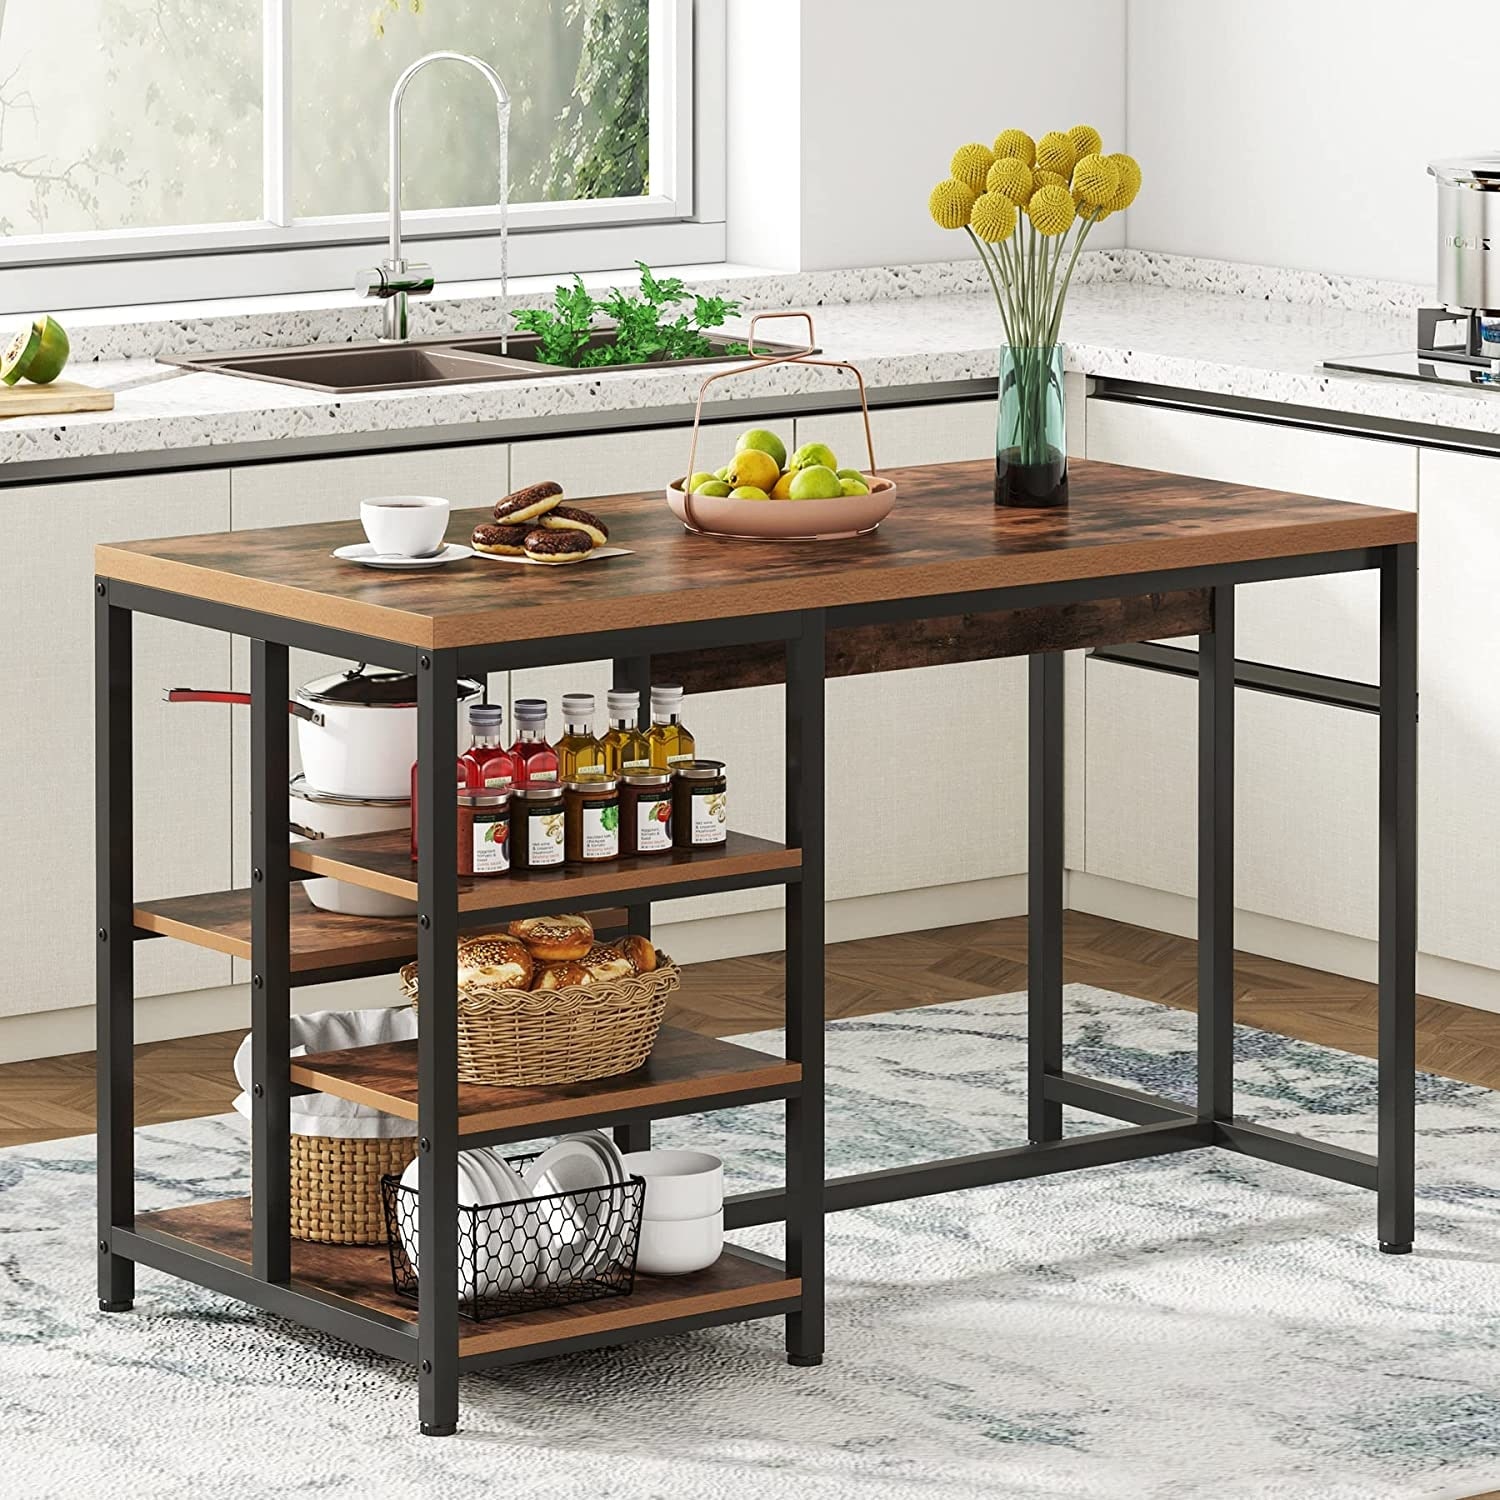 https://ak1.ostkcdn.com/images/products/is/images/direct/c2a22bee7996c674b6781f5d223b17ec65ebfd01/Tribesigns-Small-Kitchen-Island-Table-with-Storage-Shelves%2C-Dining-Table-%28Not-Including-Stools%29.jpg